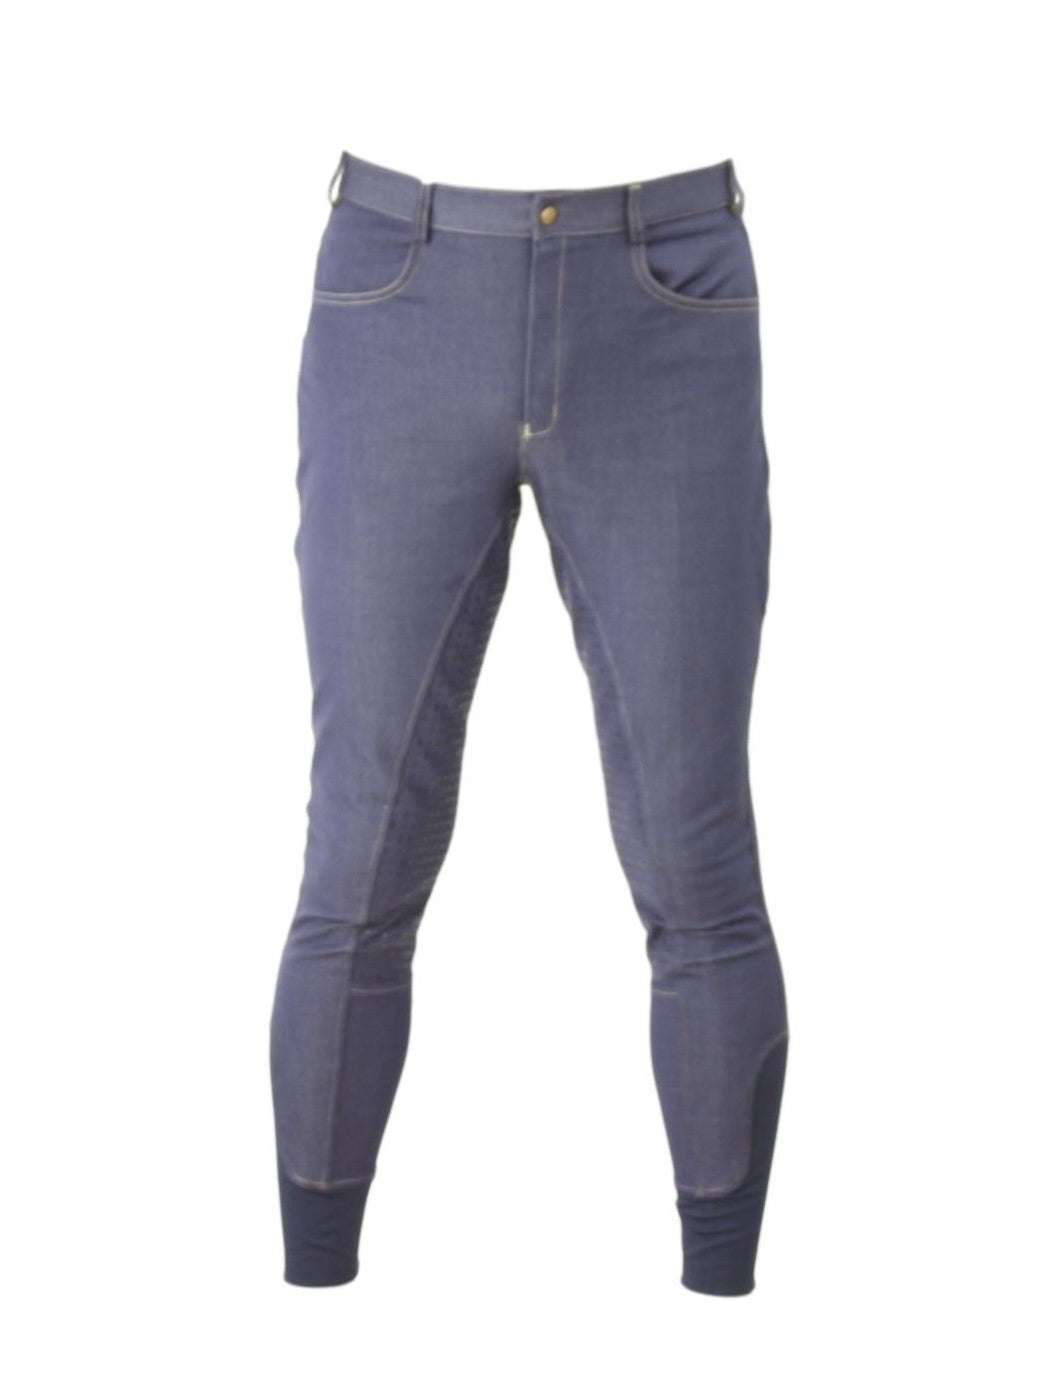 Men's Denim Breeches with silicone seat and phone pocket-Plum Tack-The Equestrian